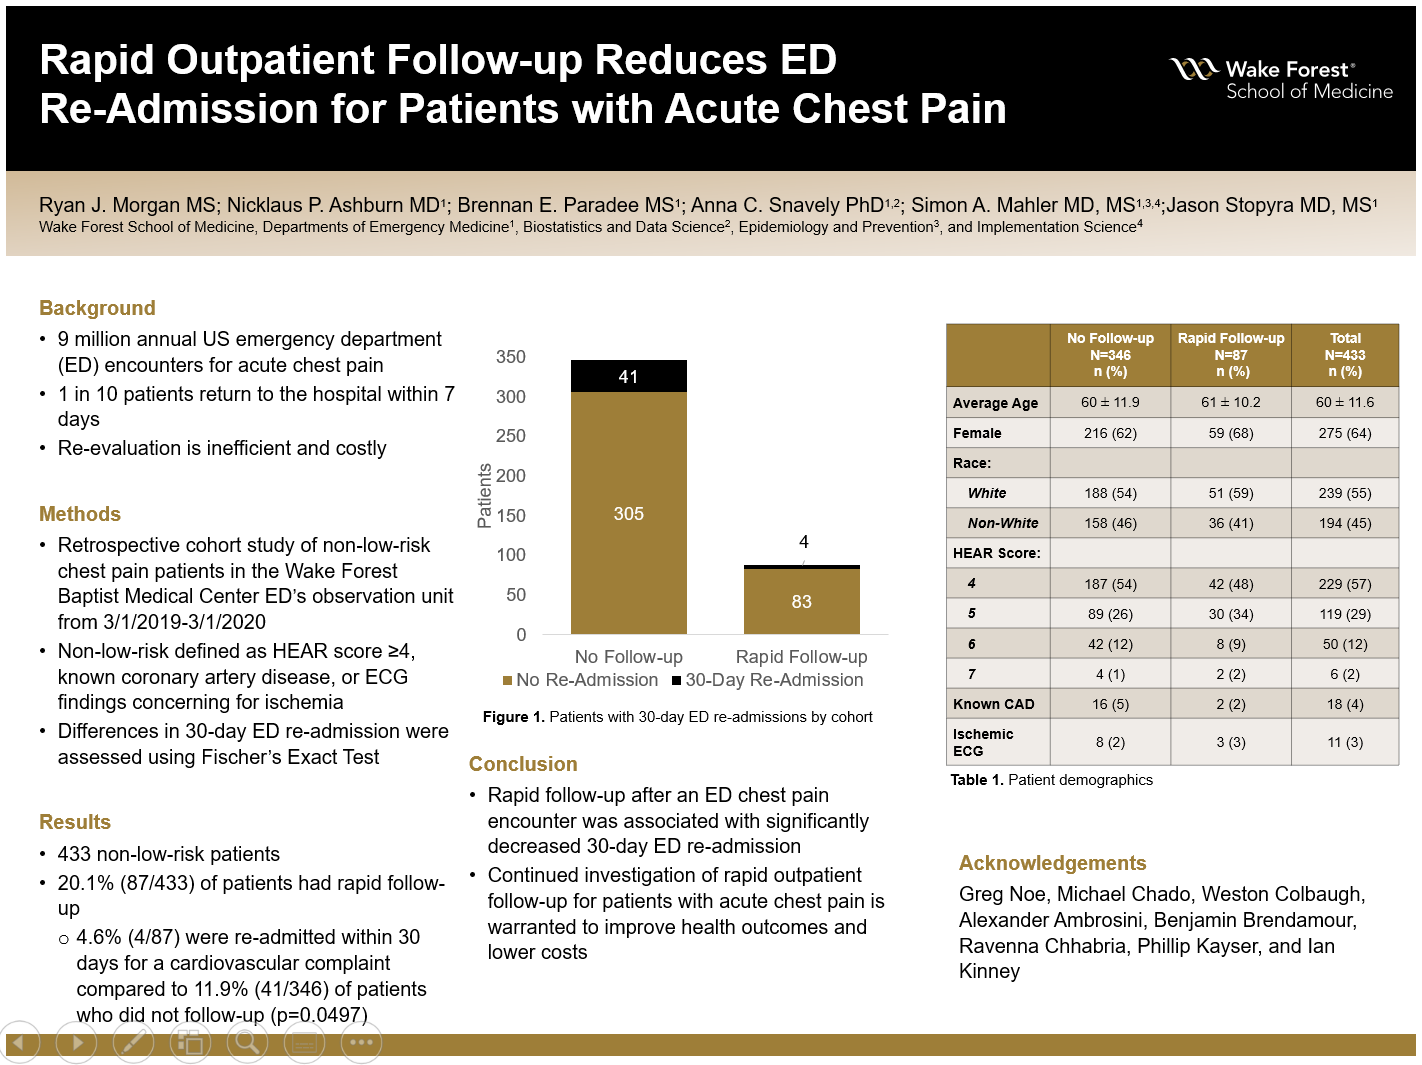 Showcase Image for Rapid Outpatient Follow-up Reduces Emergency Department Re-admission for Patients with Acute Chest Pain